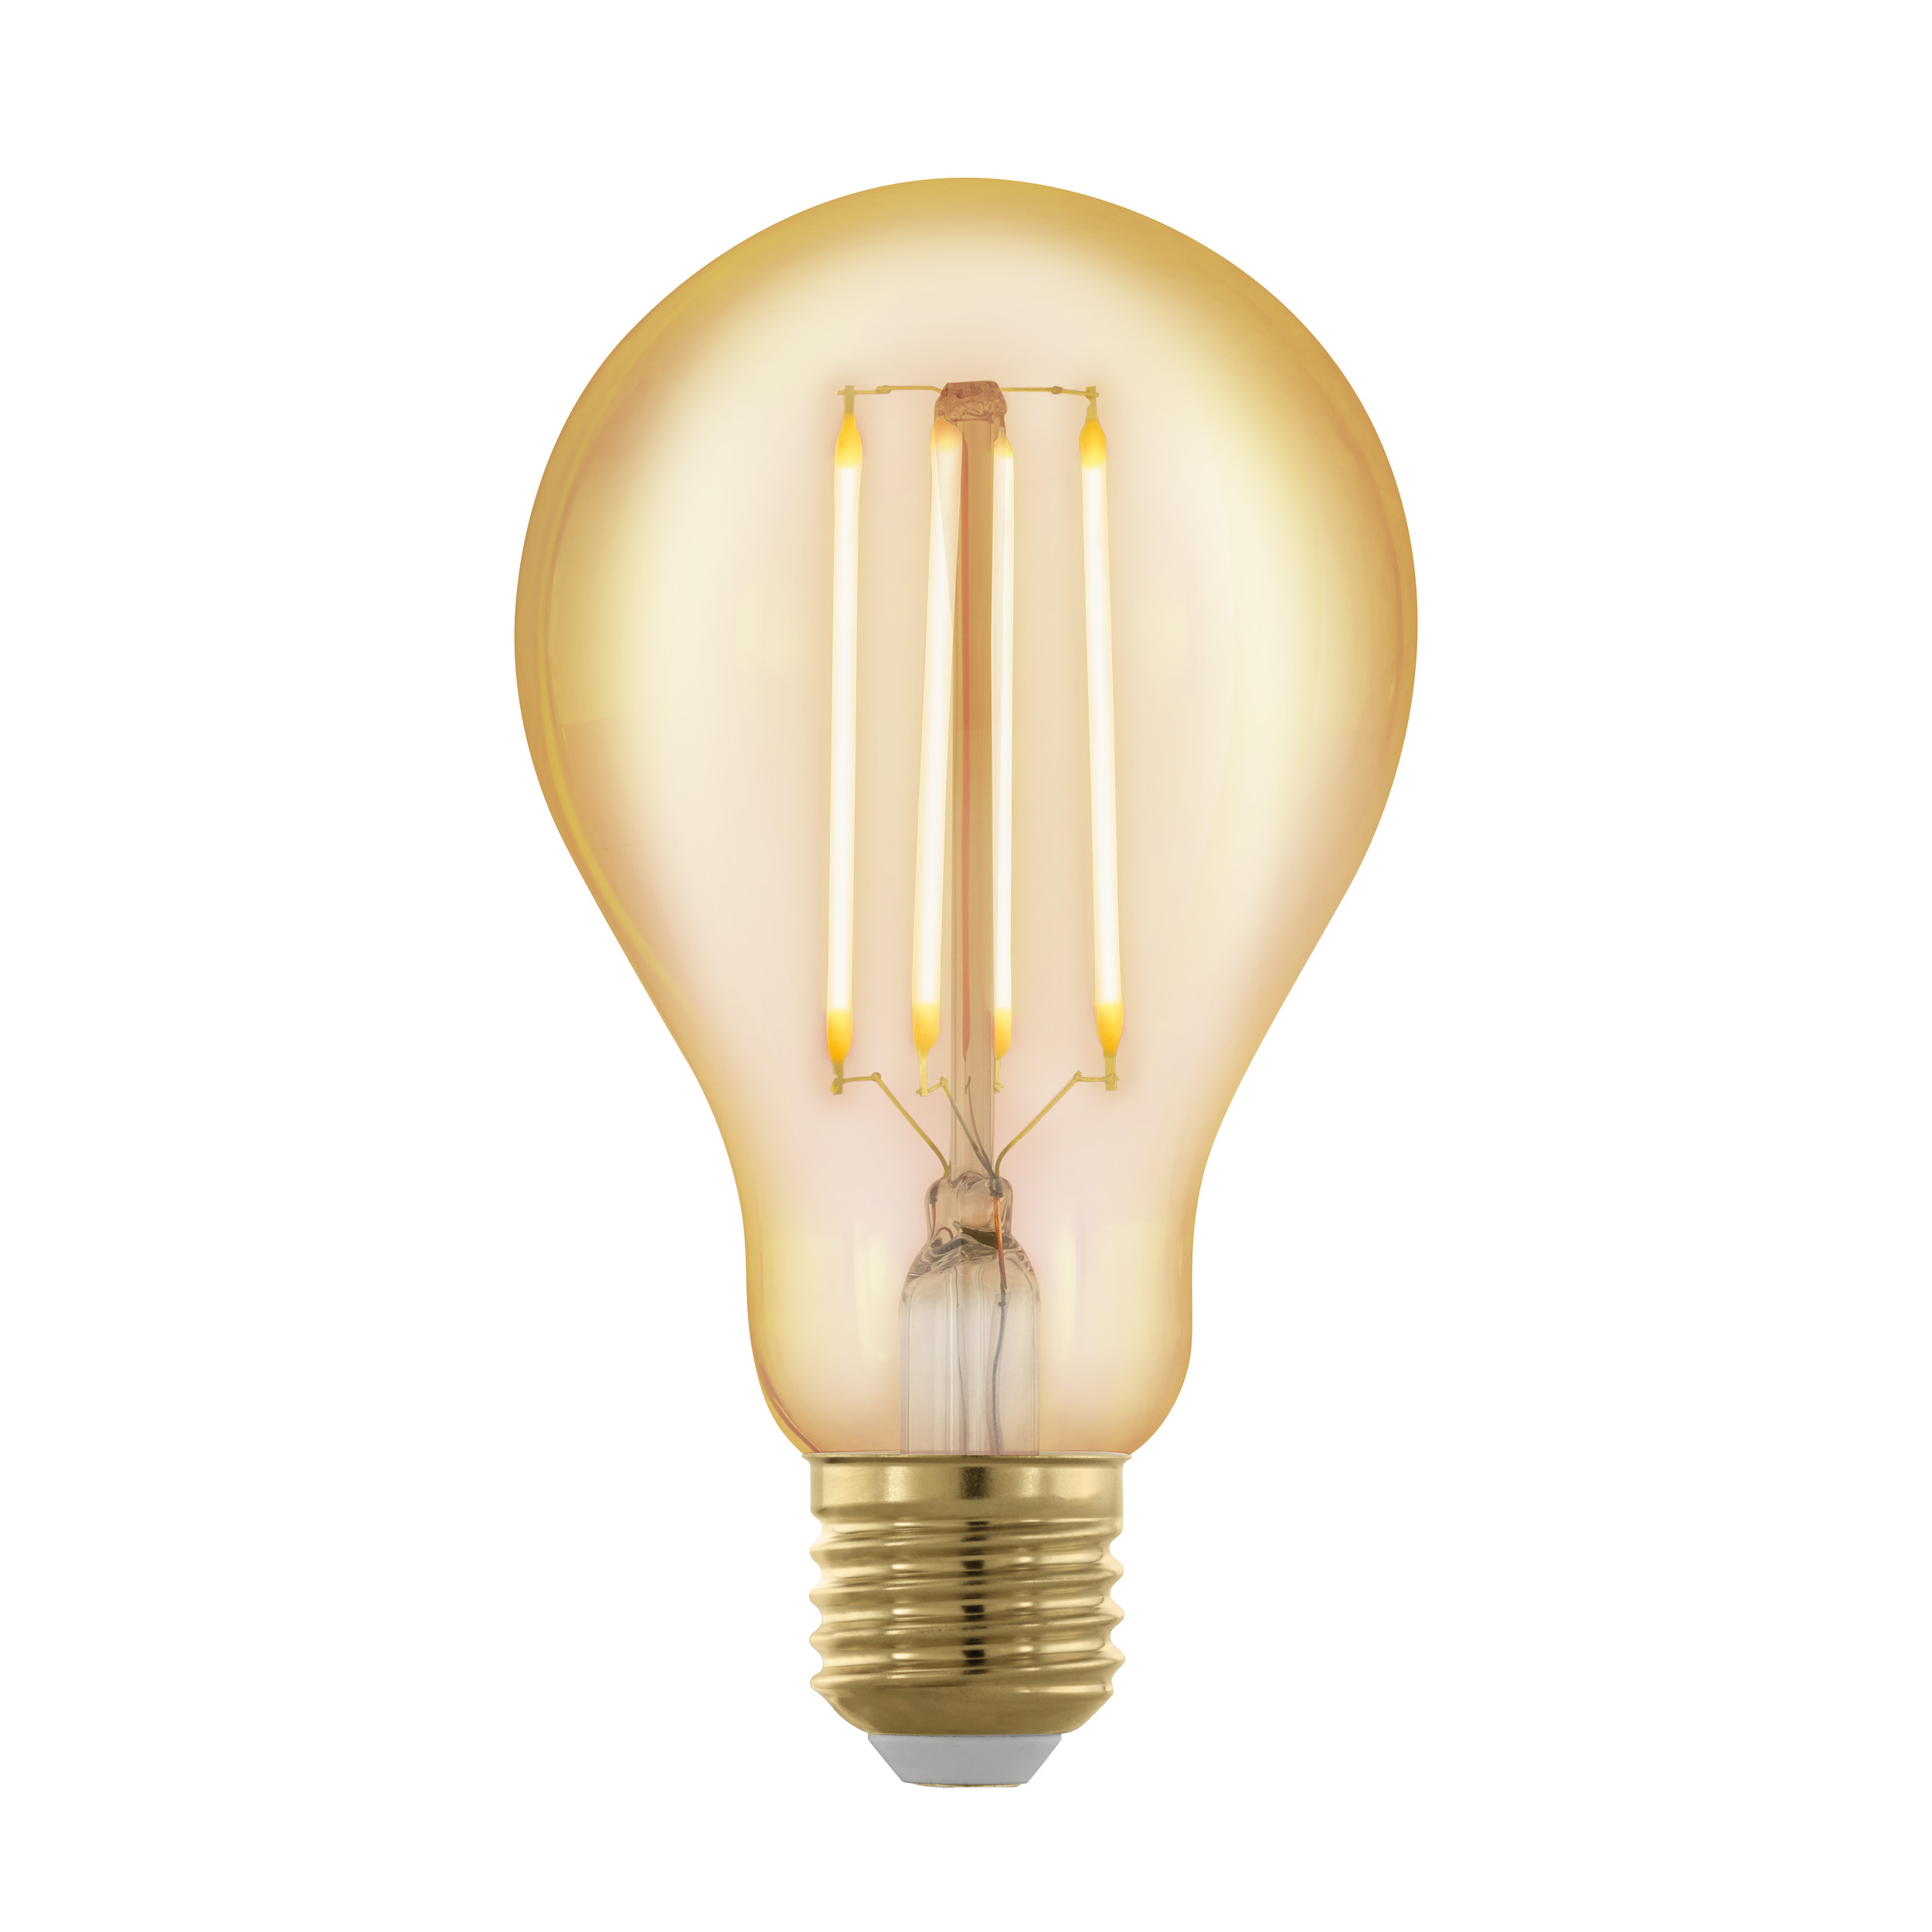 Lampe LED golden age E27 classic A75 320Lm 1700K dimmable